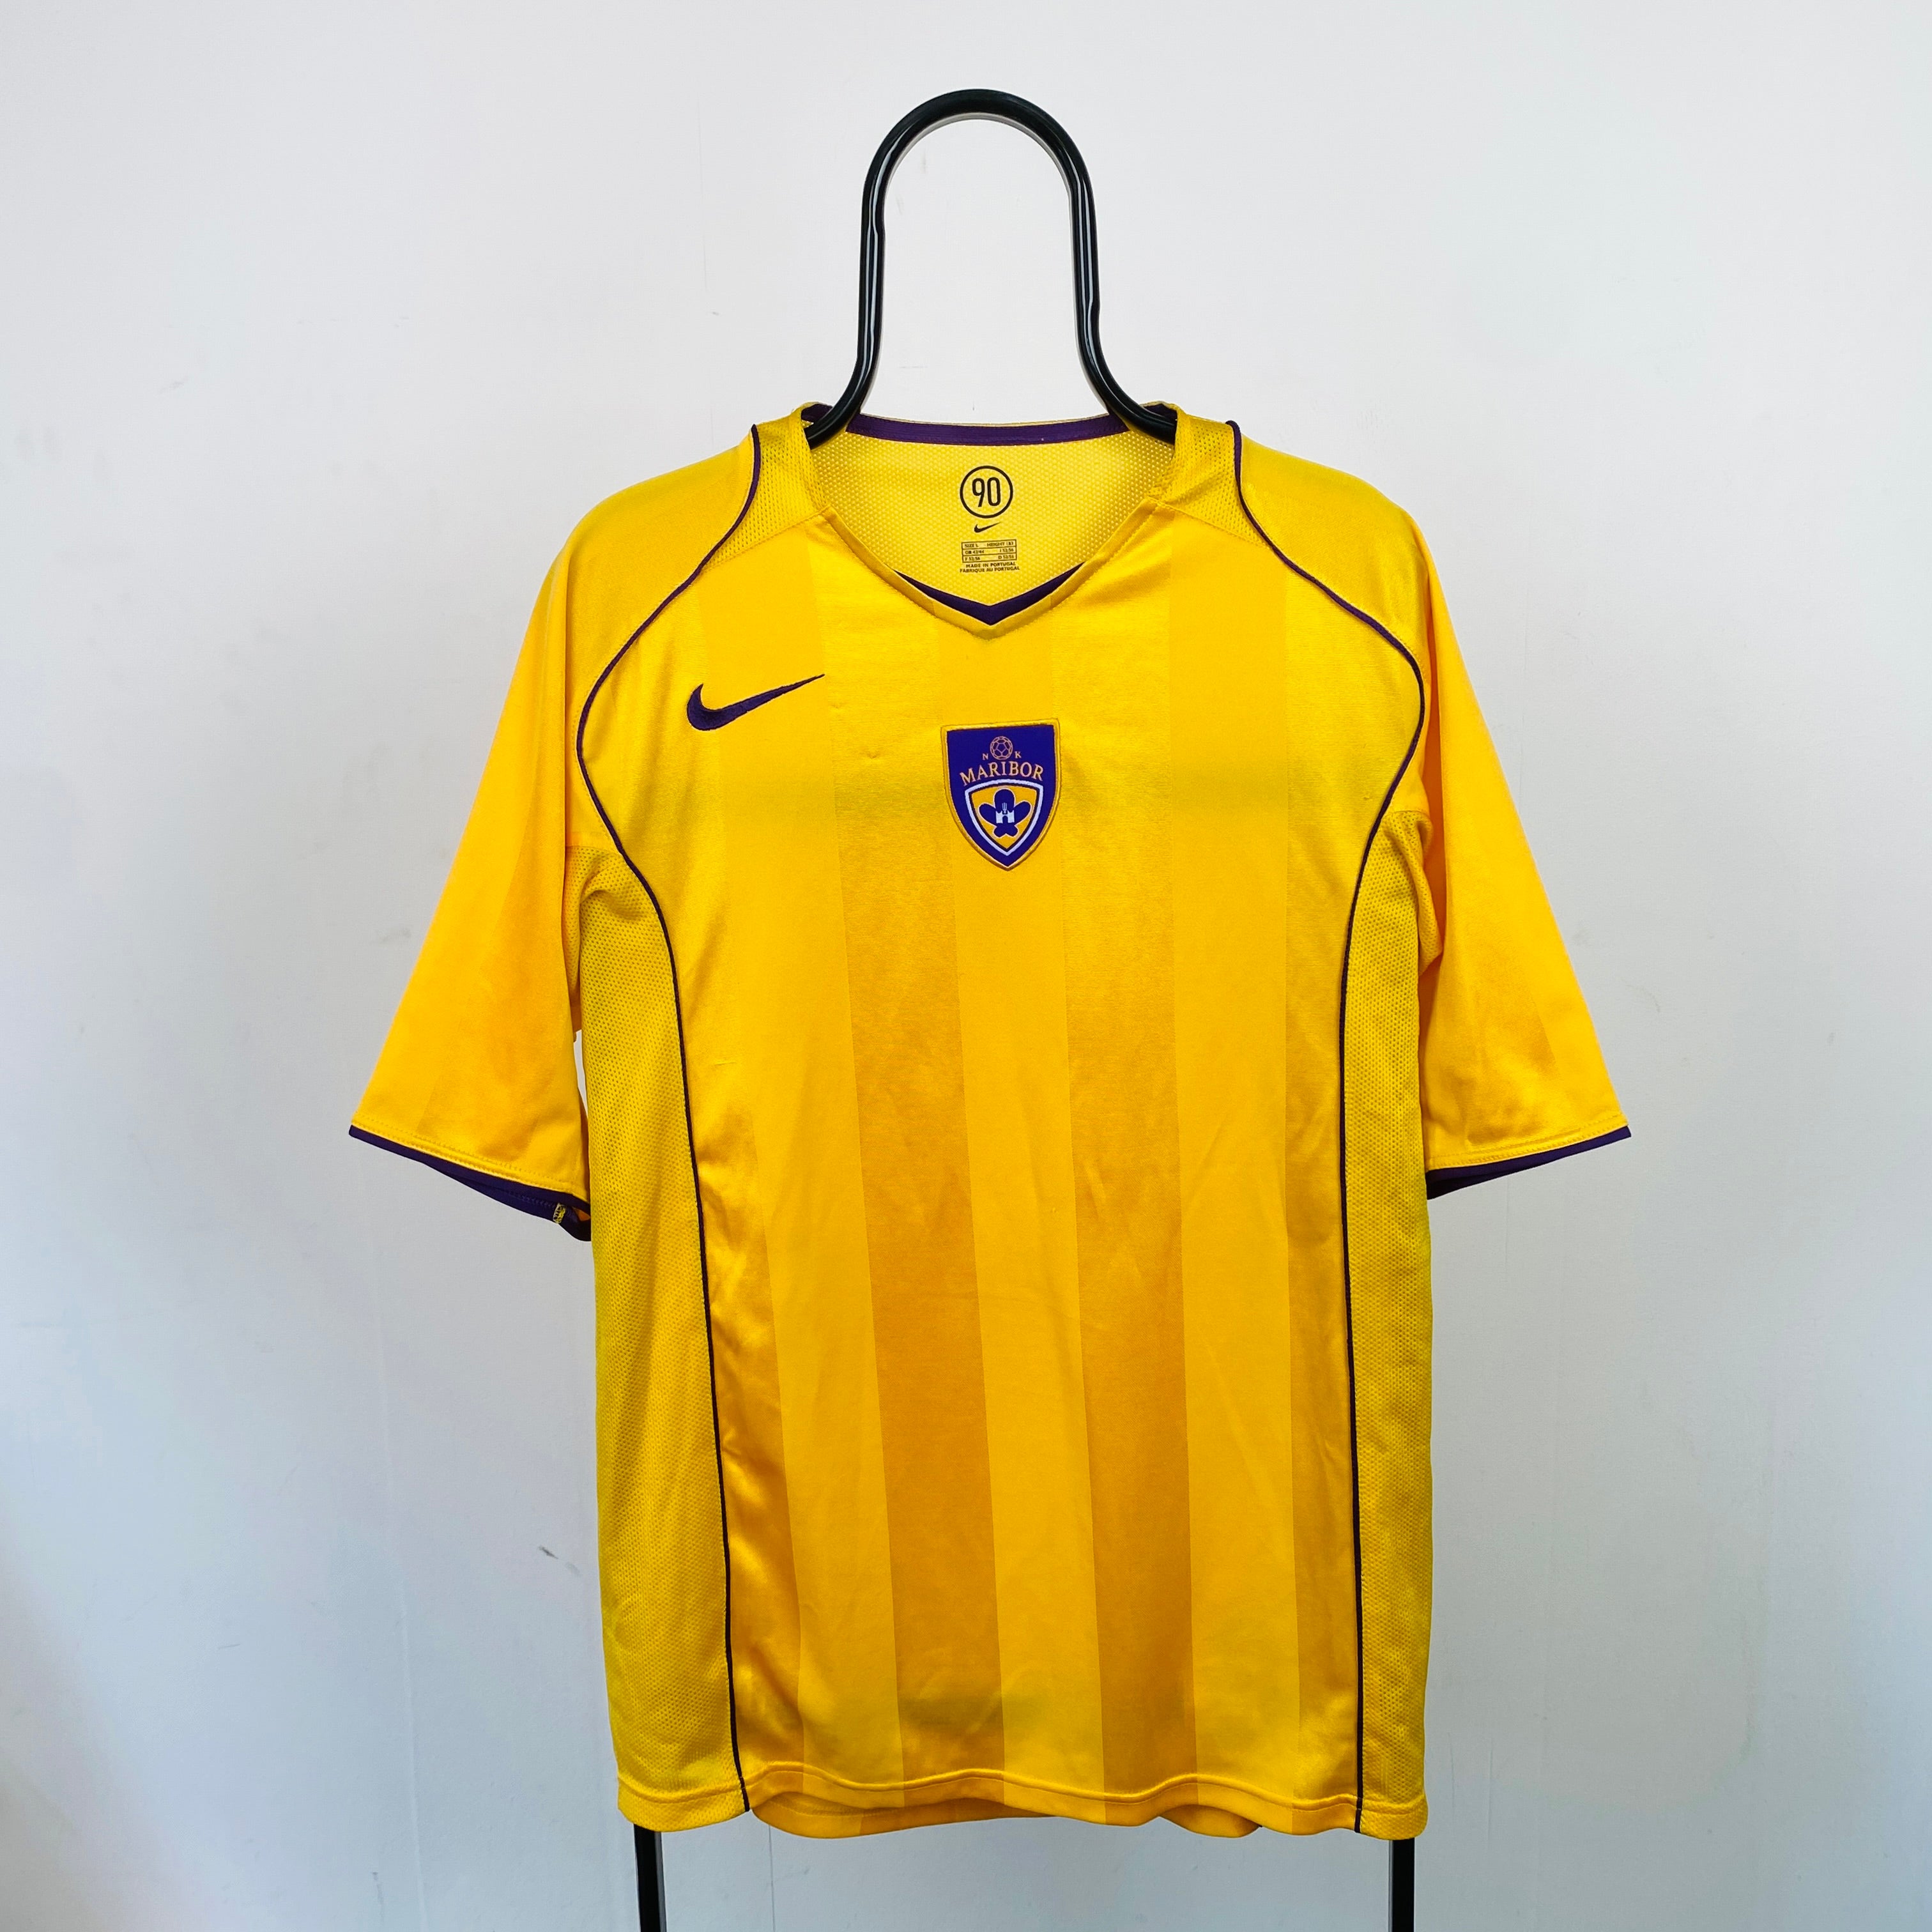 Vintage Nike Blank Soccer Jersey Shirt 90s Made In Usa Yellow Sz